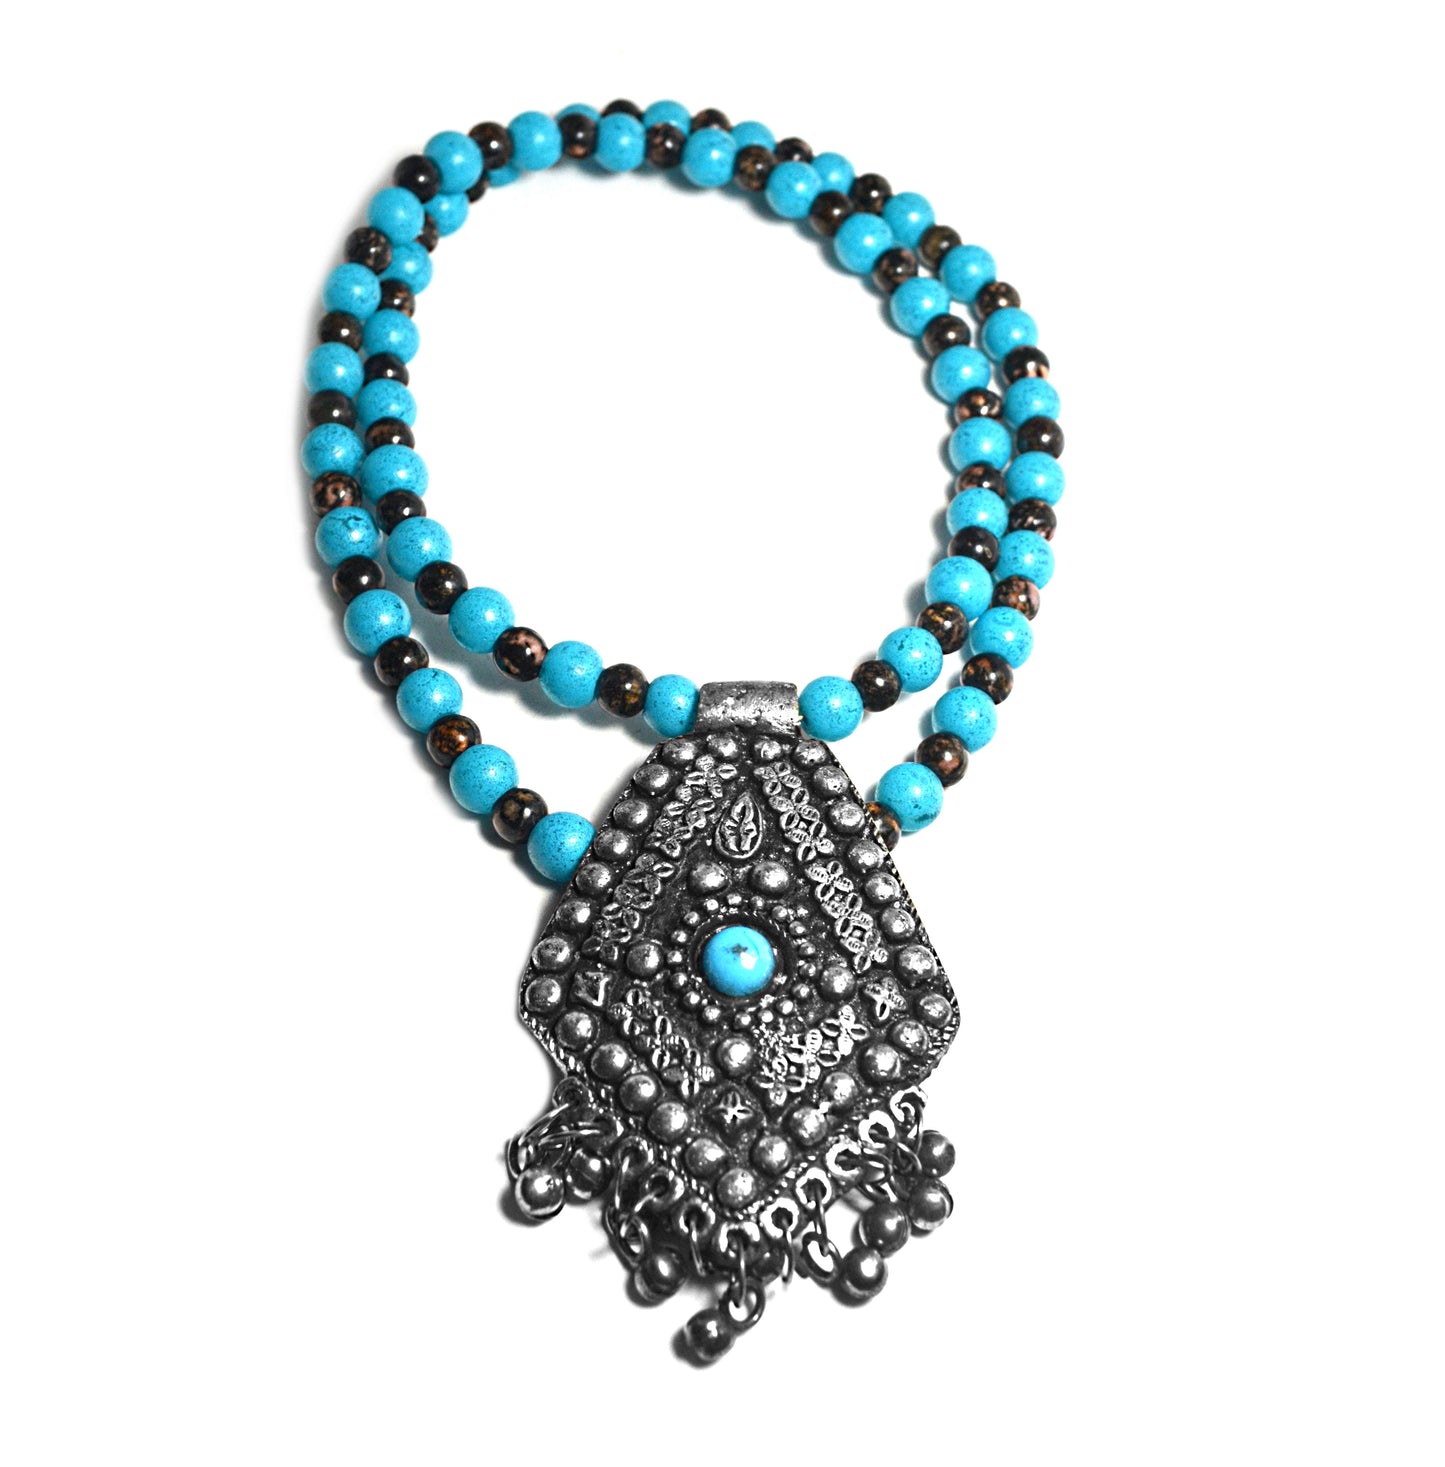 Turquoise & Pewter Bell Necklace by J.J. Dean